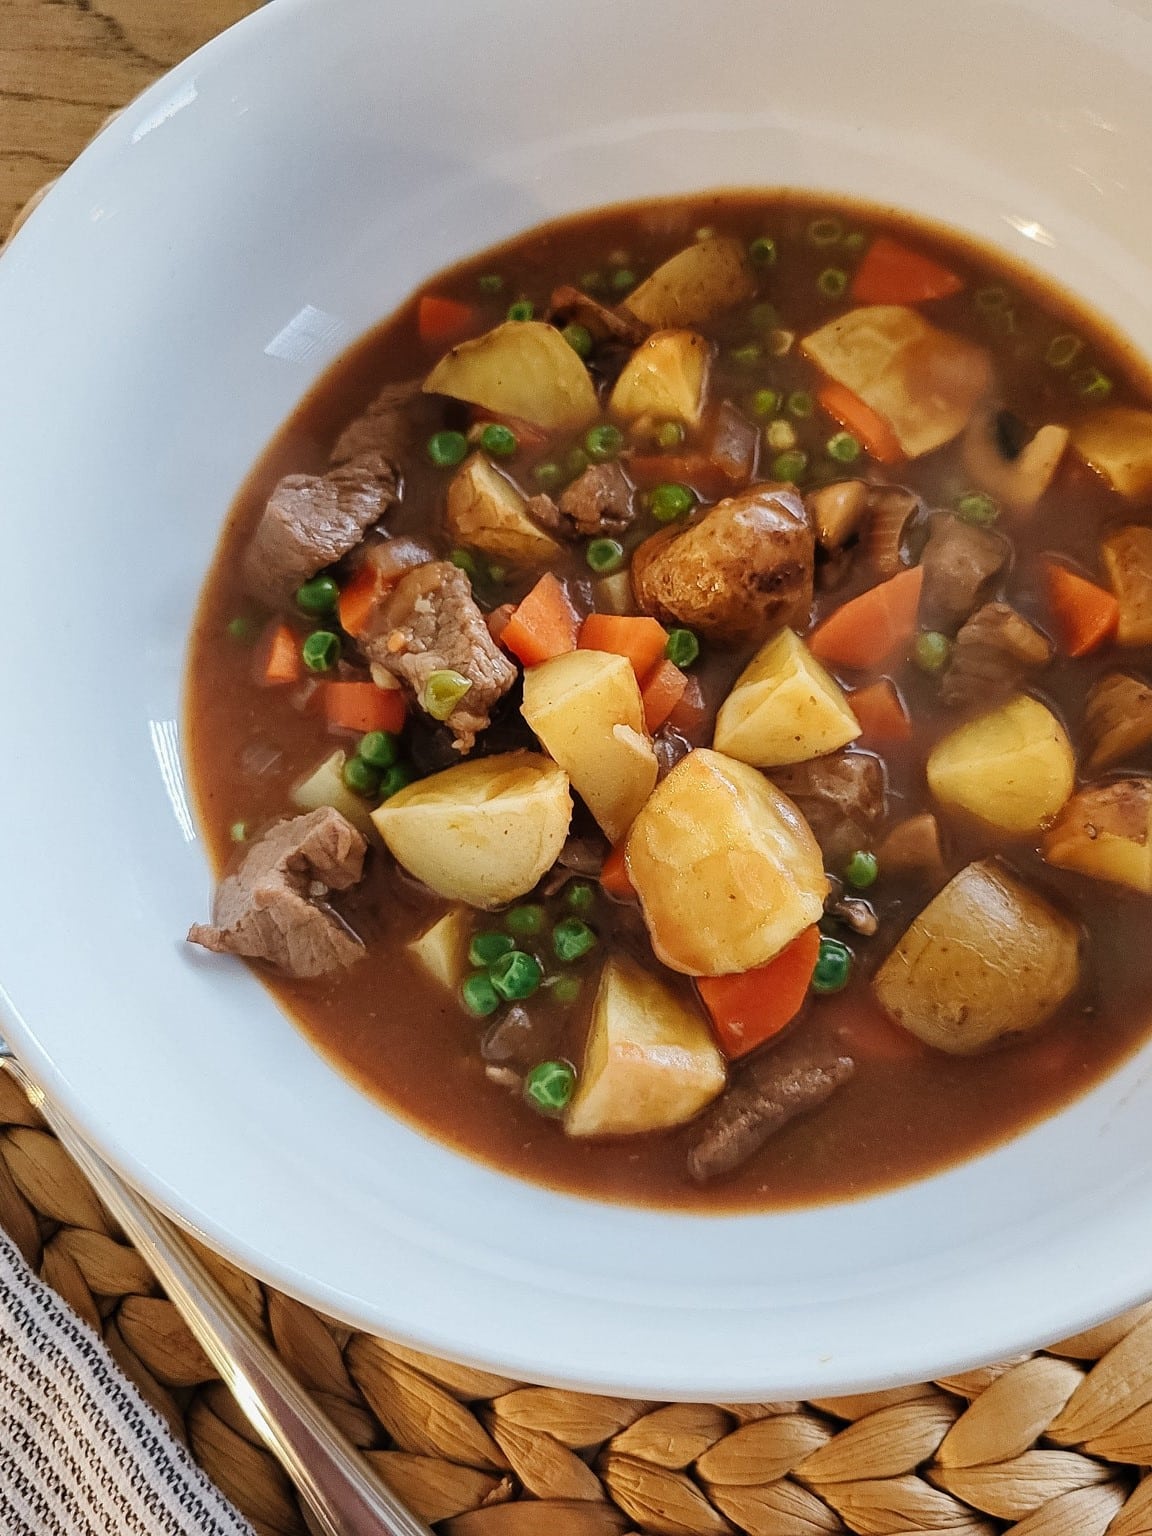 Homemade English-Style Beef Stew with Roasted Potatoes